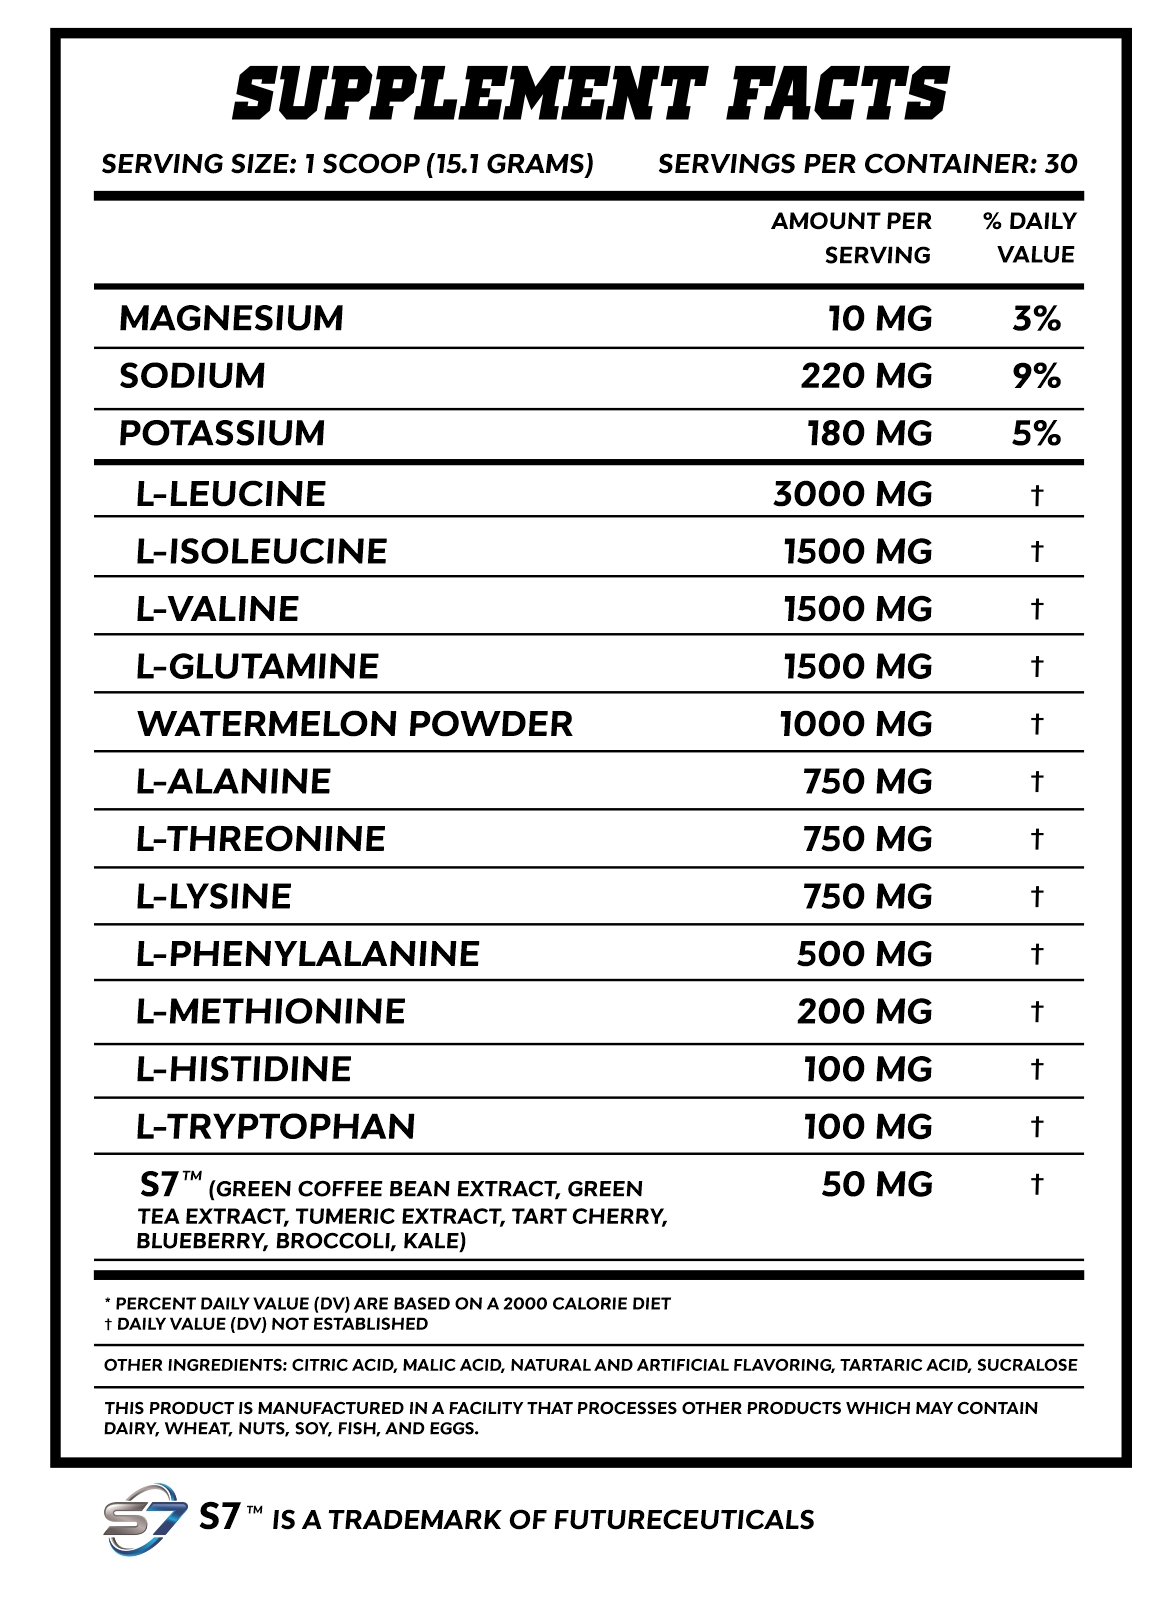 Supplement facts for a product with ingredients like magnesium, L-Leucine, watermelon powder, and green tea extract. Made in a facility processing dairy and nuts.